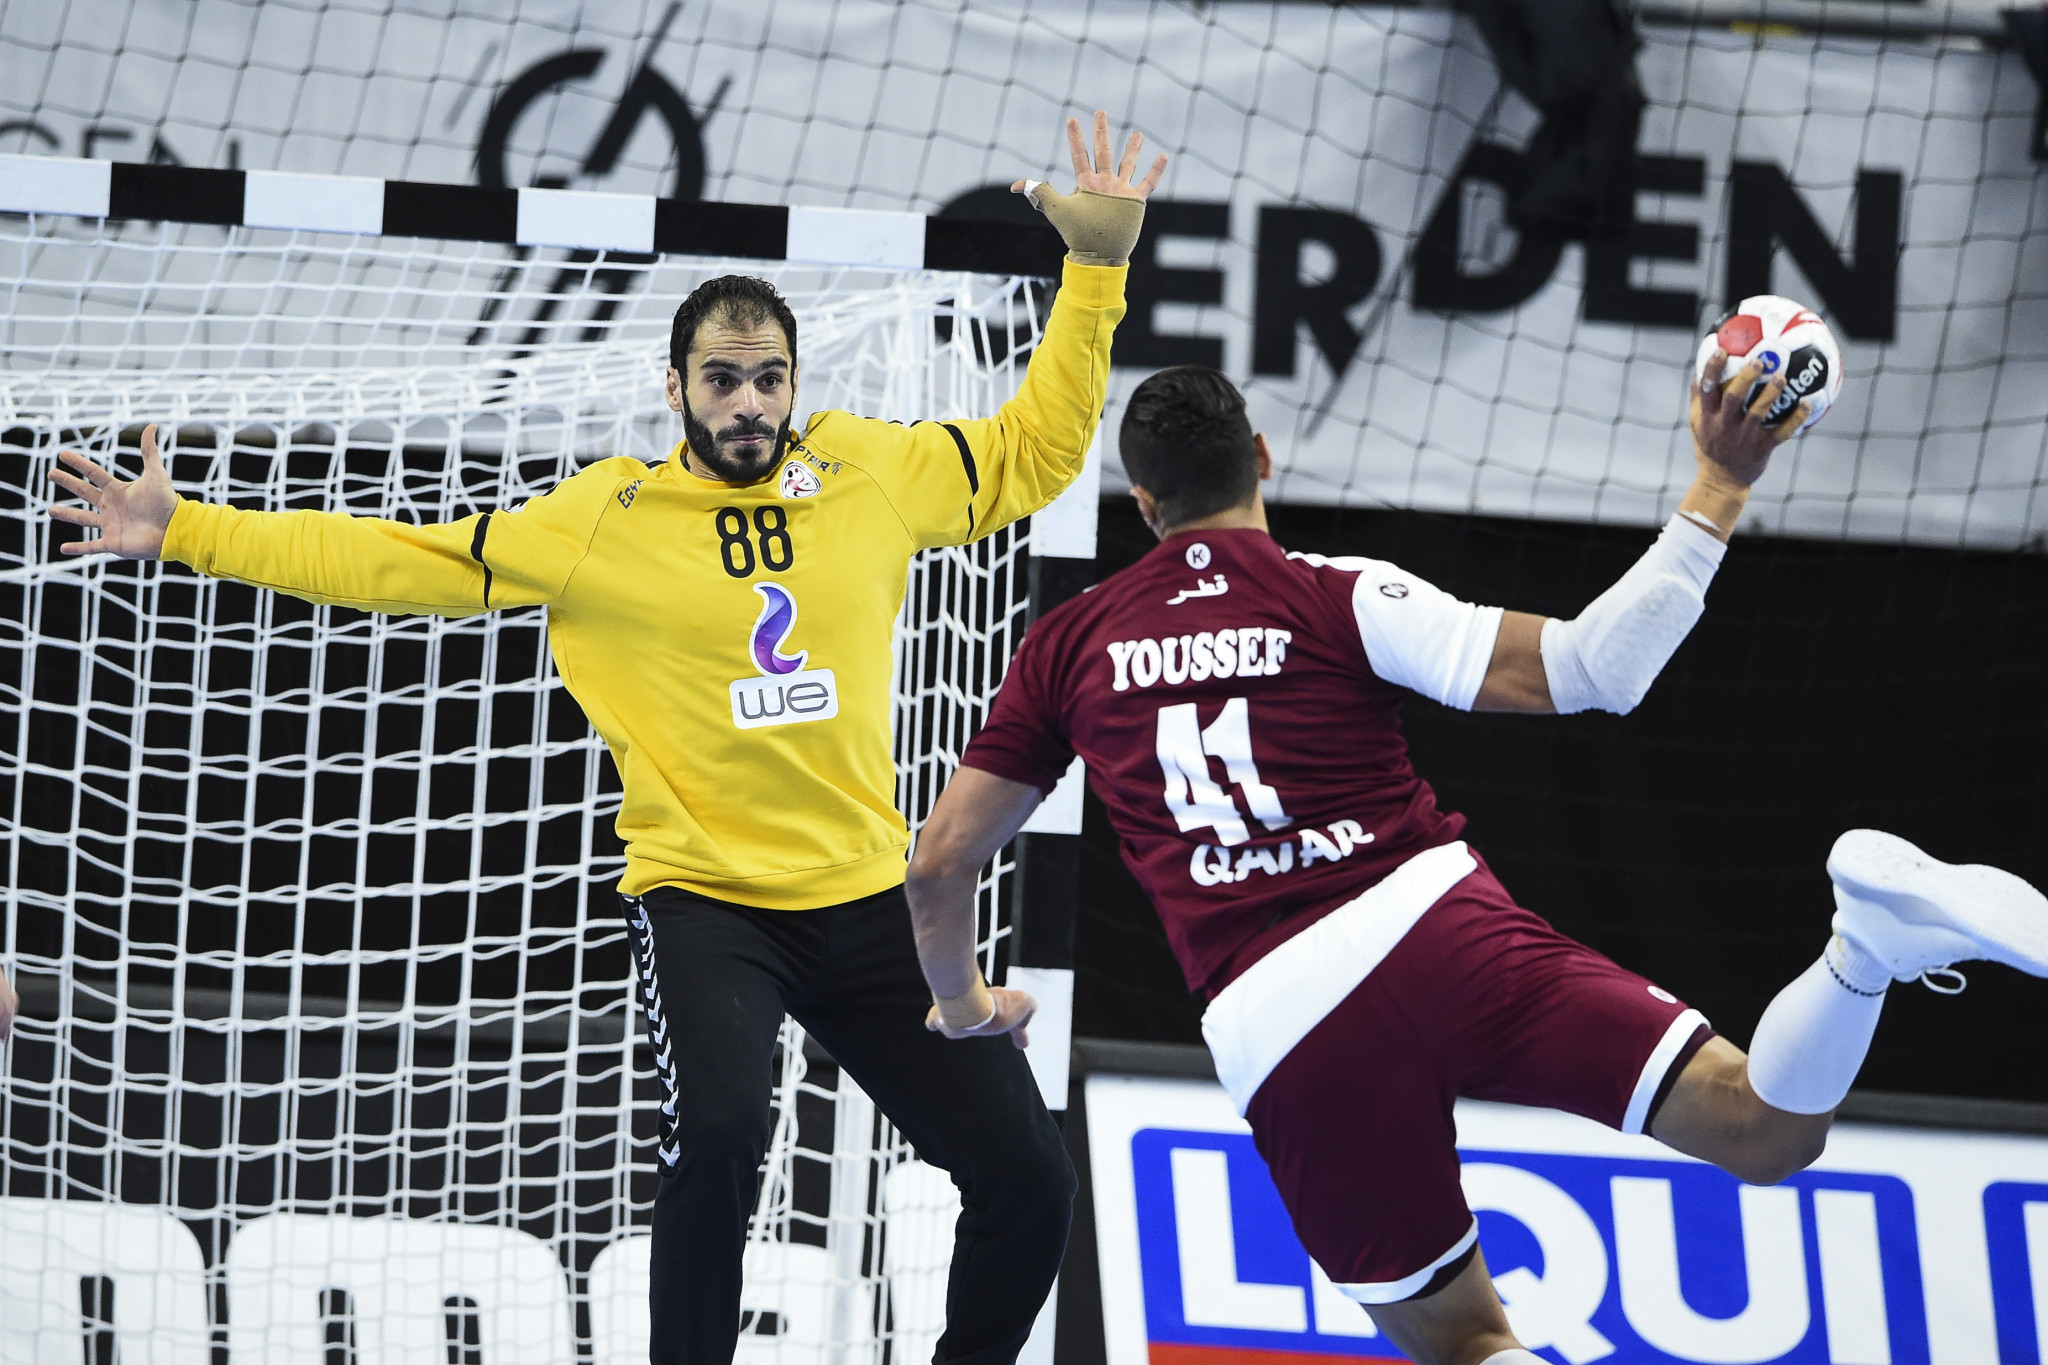 Qatar recover from shock defeat to beat Egypt at IHF Men's Handball World Championship